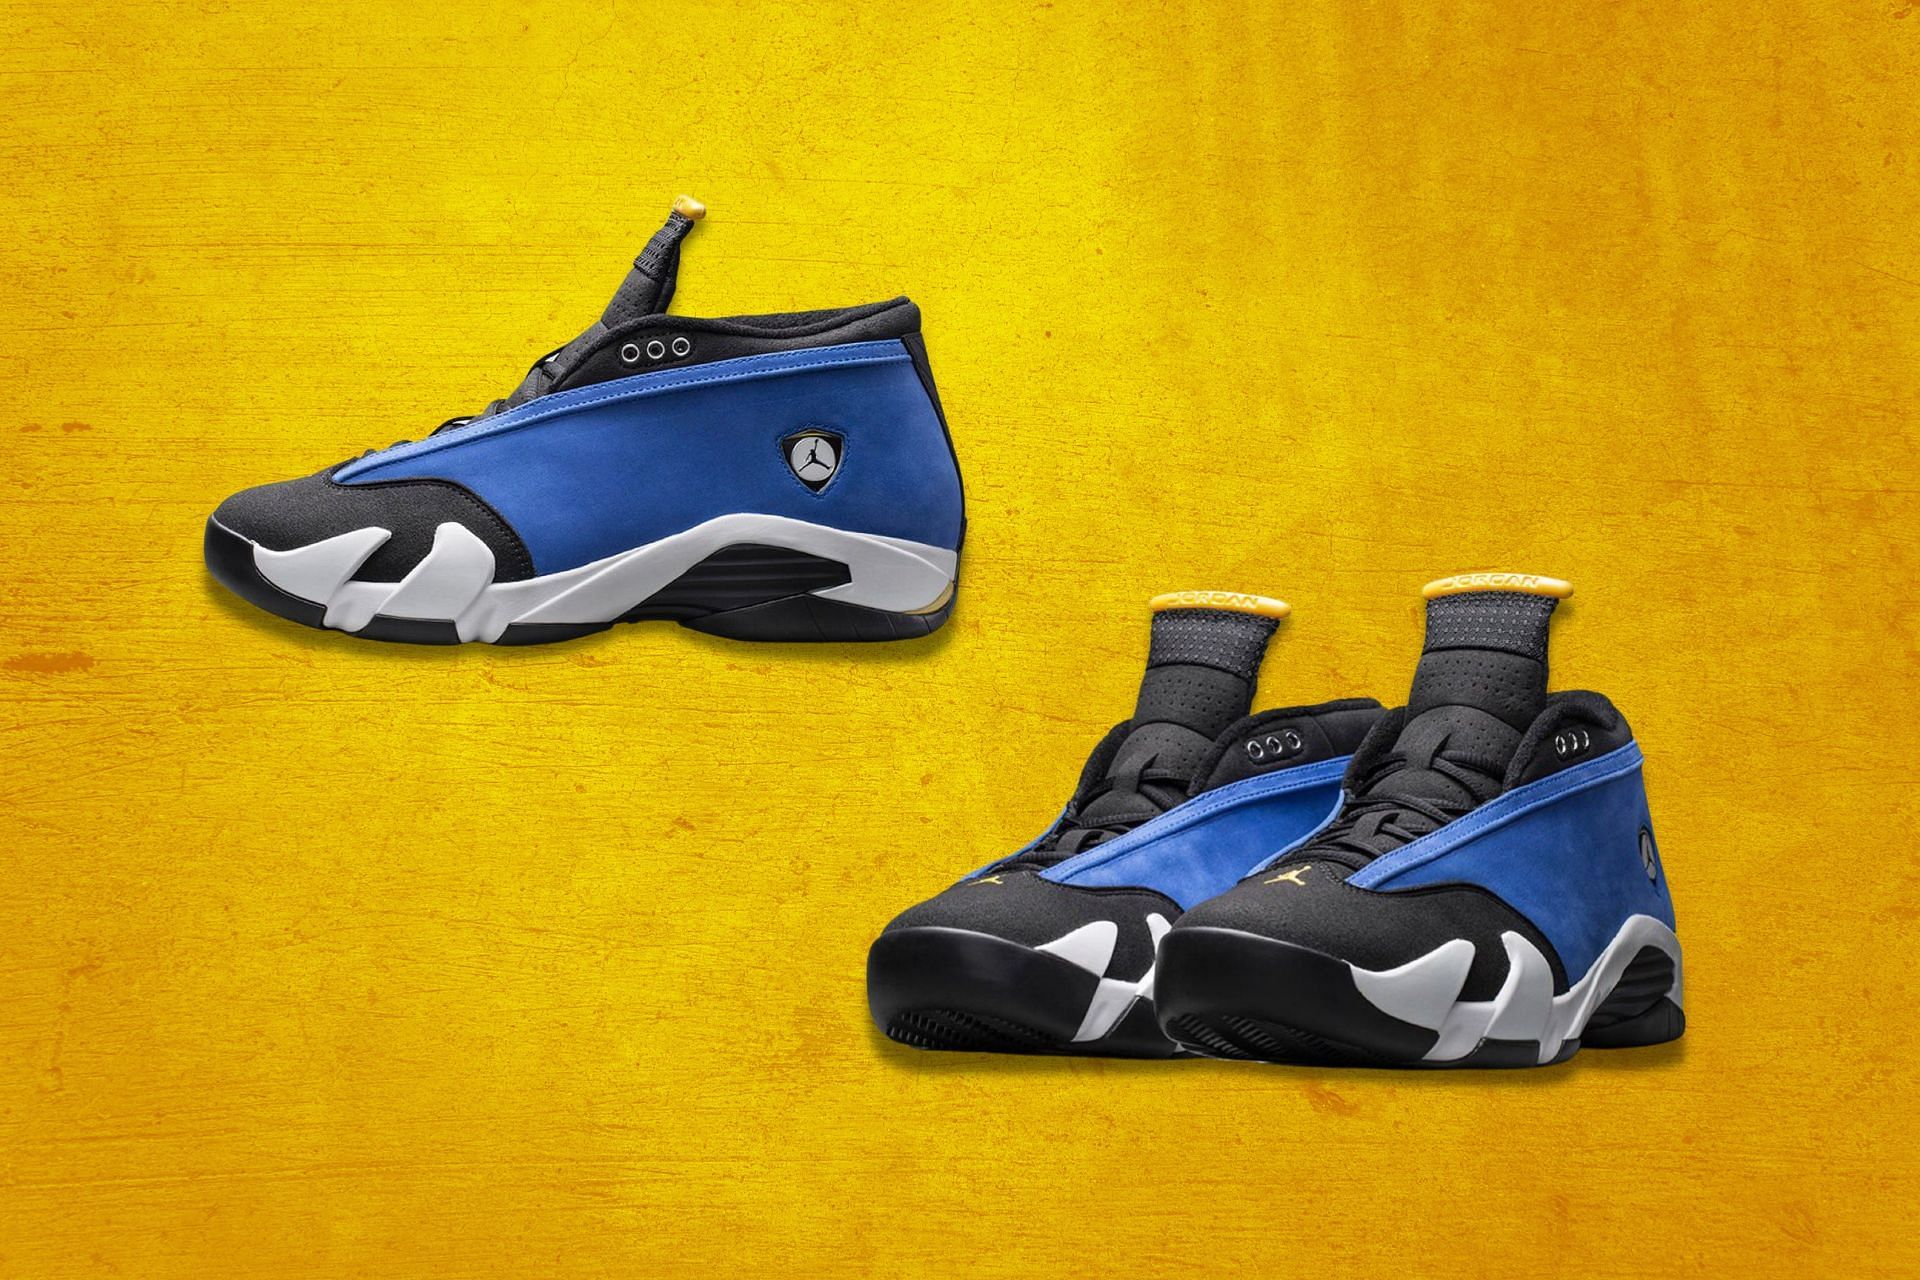 Where to Air Jordan Laney shoes? release date, and more details